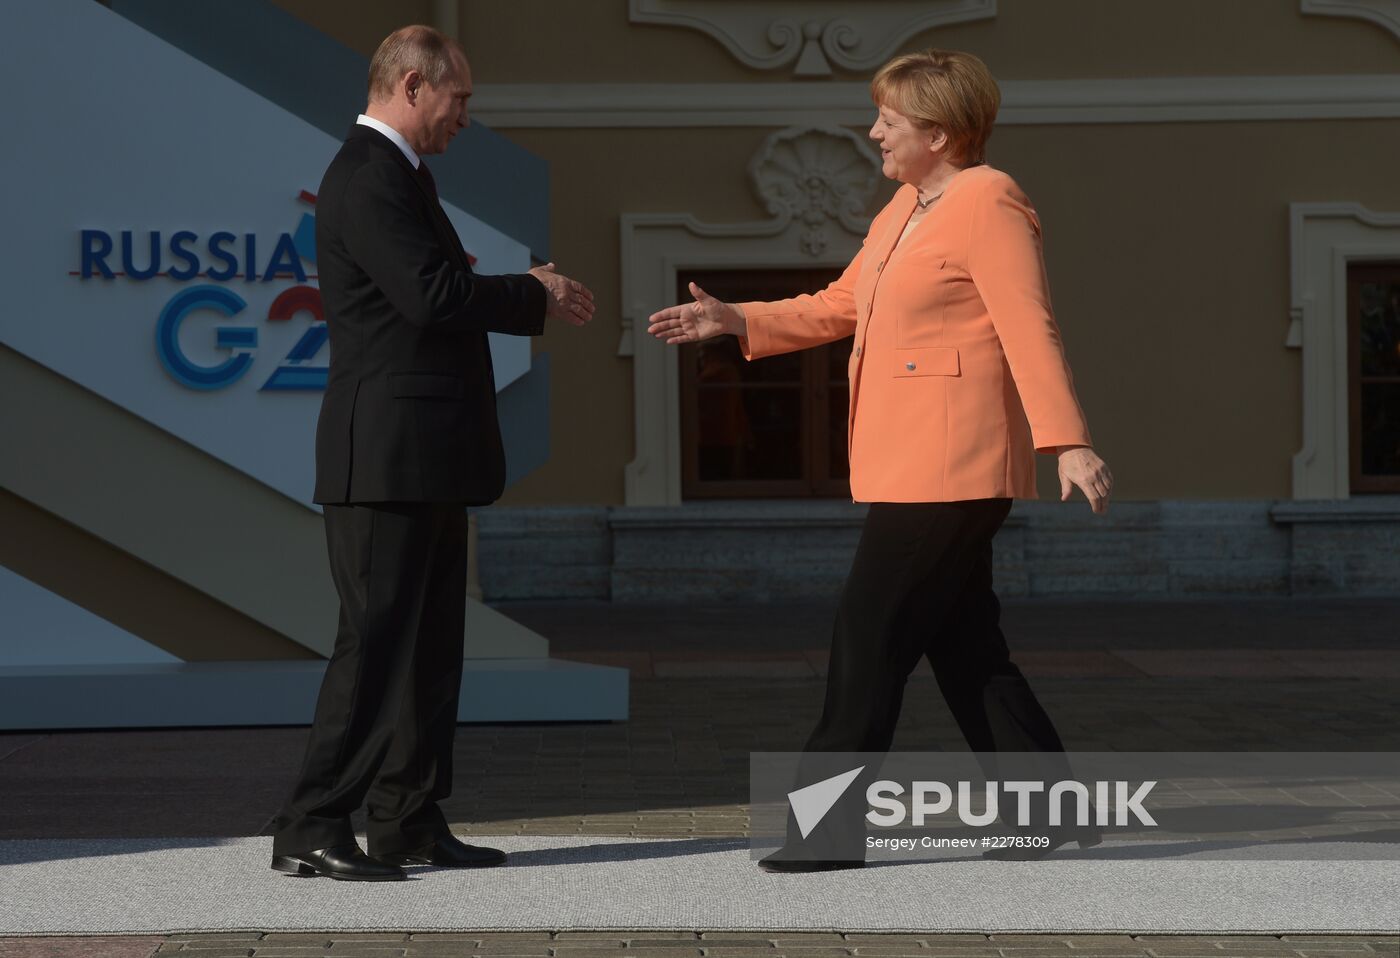 Official welcome of G20 leaders by Vladimir Putin